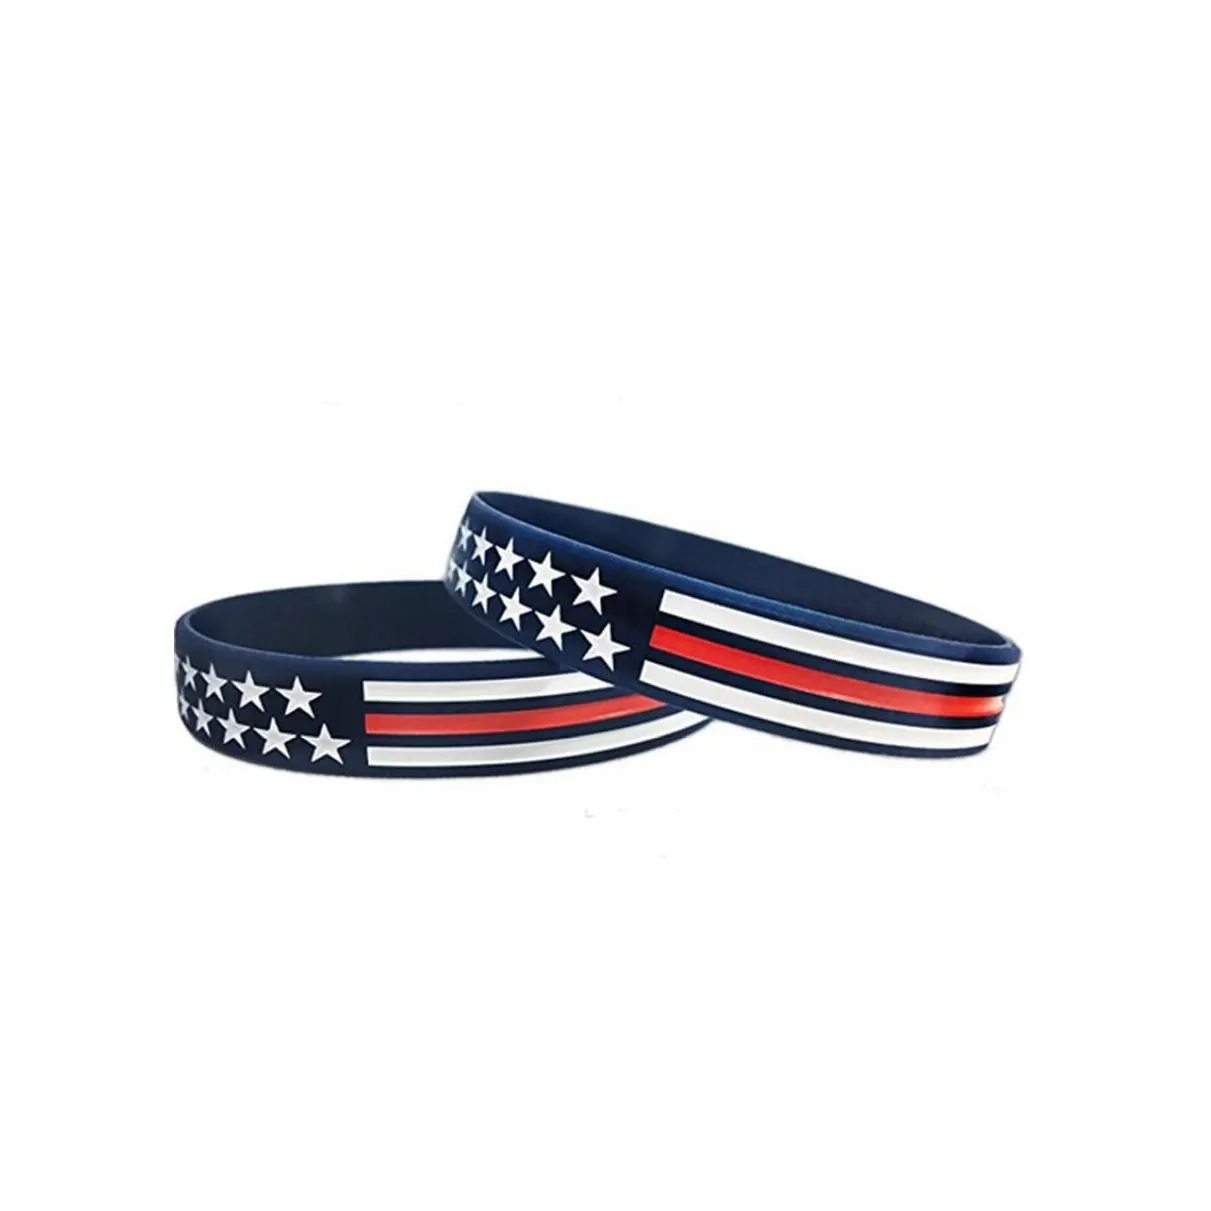 23 types TRUMP Make America Great Again Letter Silicone Wristband Rubber Bracelet Trump Supporters Wristband Bracelets Basketball